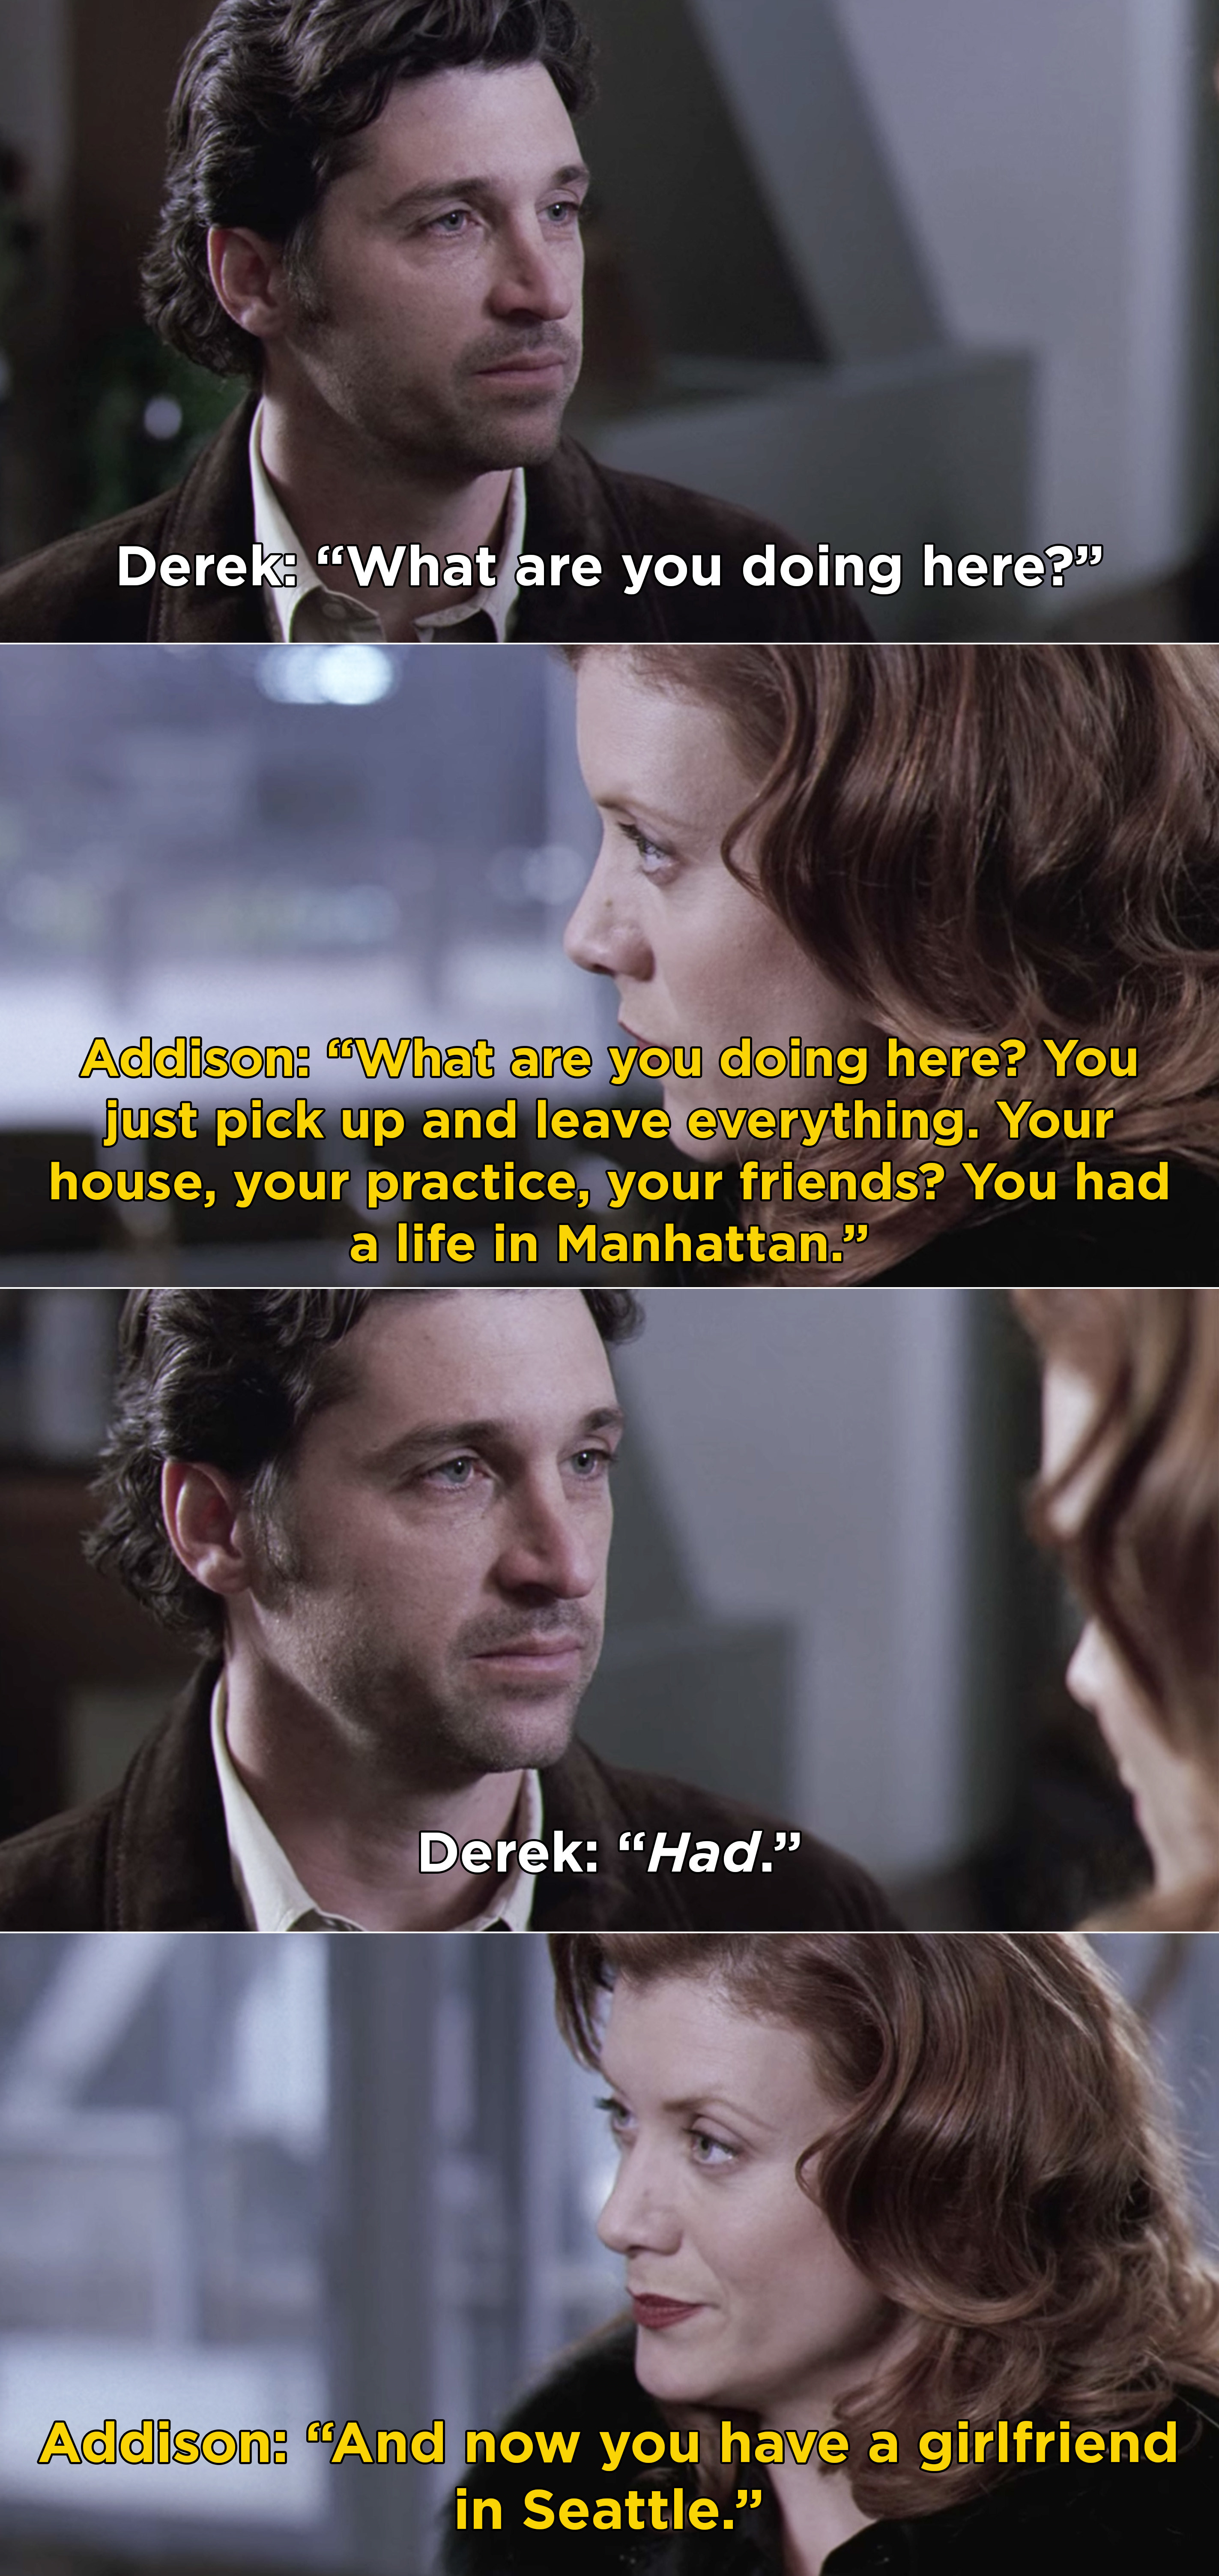 Addison saying that Derek had a life in Manhattan and now he has a girlfriend in Seattle